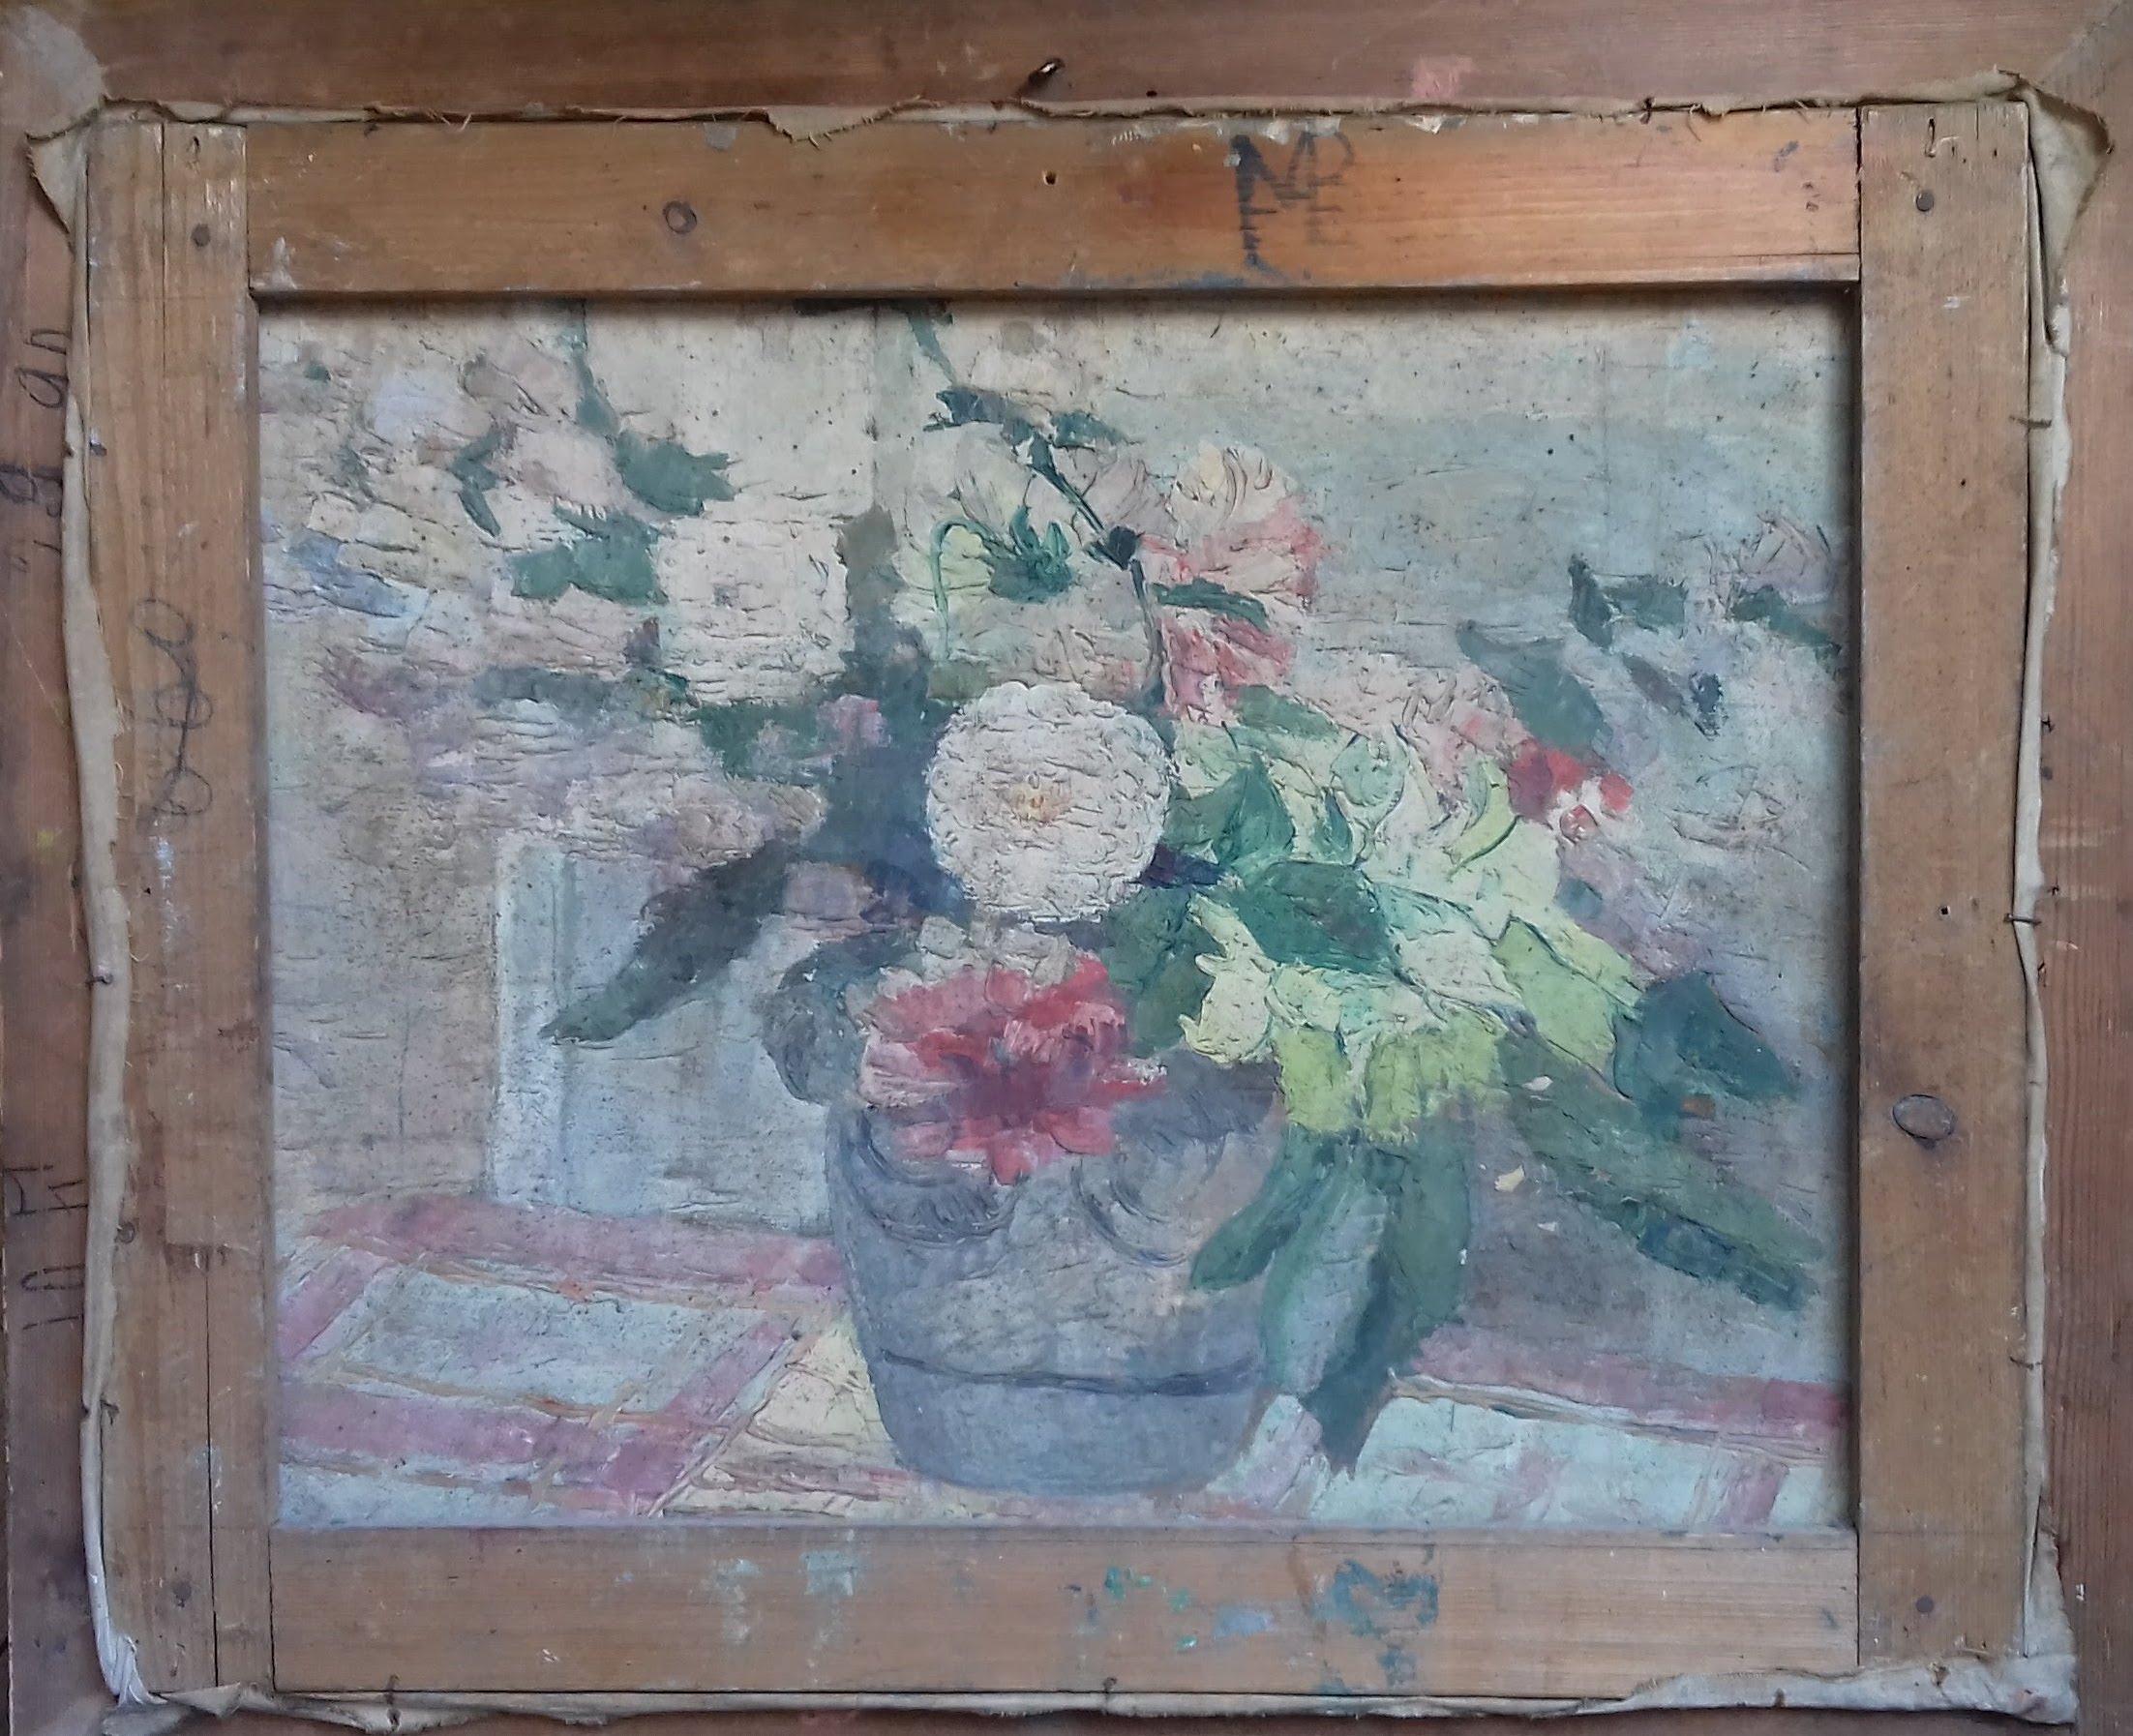 A sensitive depiction of flowers blooming in a summer garden that is full of delight. Dating from circa 1910-1920 and French in origin, this oil on canvas in unsigned. It was acquired near Pontoise, a city near Paris that had important links to the